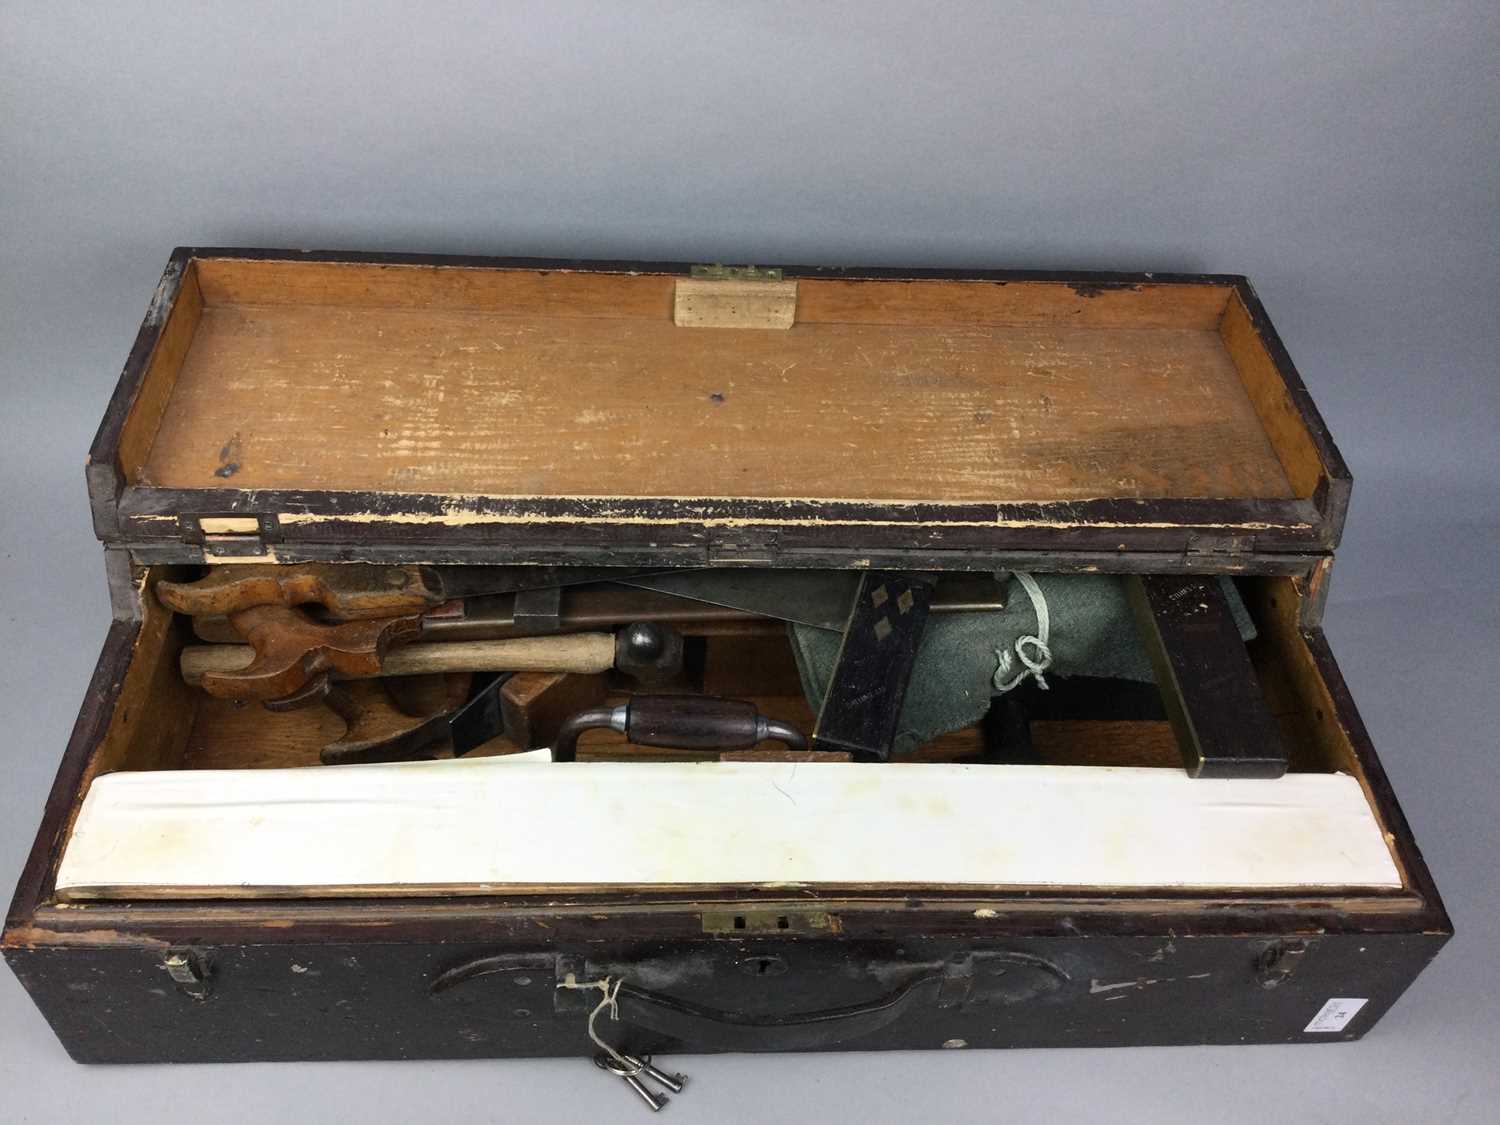 Lot 24 - A TOOL BOX CONTAINING A GOOD SELECTION OF EARLY 20TH CENTURY TOOLS